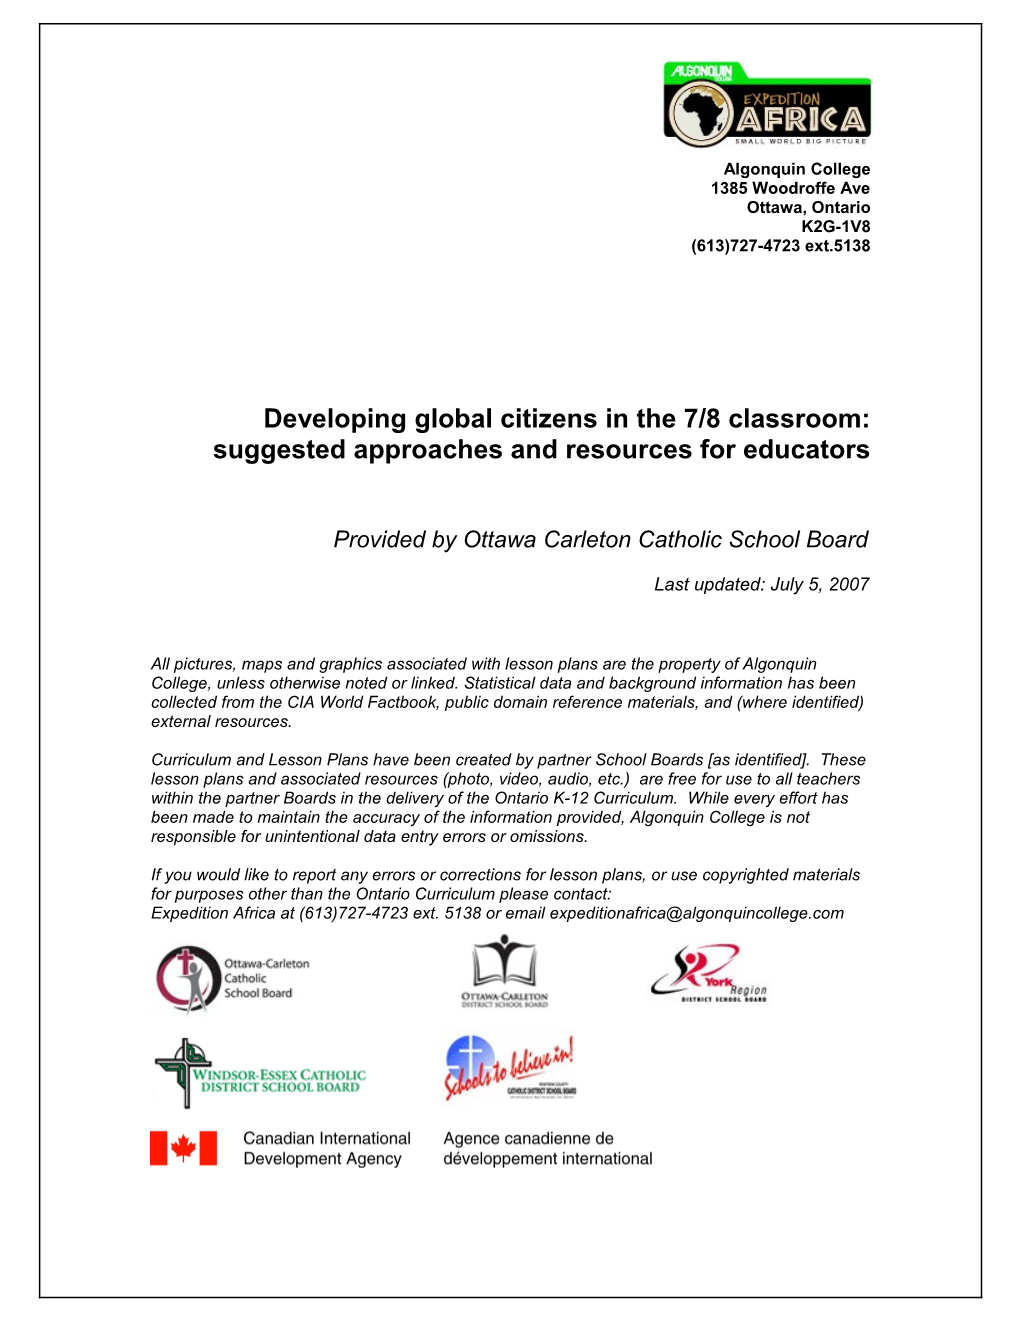 Developing Global Citizens in the 7/8 Classroom: Suggested Approaches and Resources For